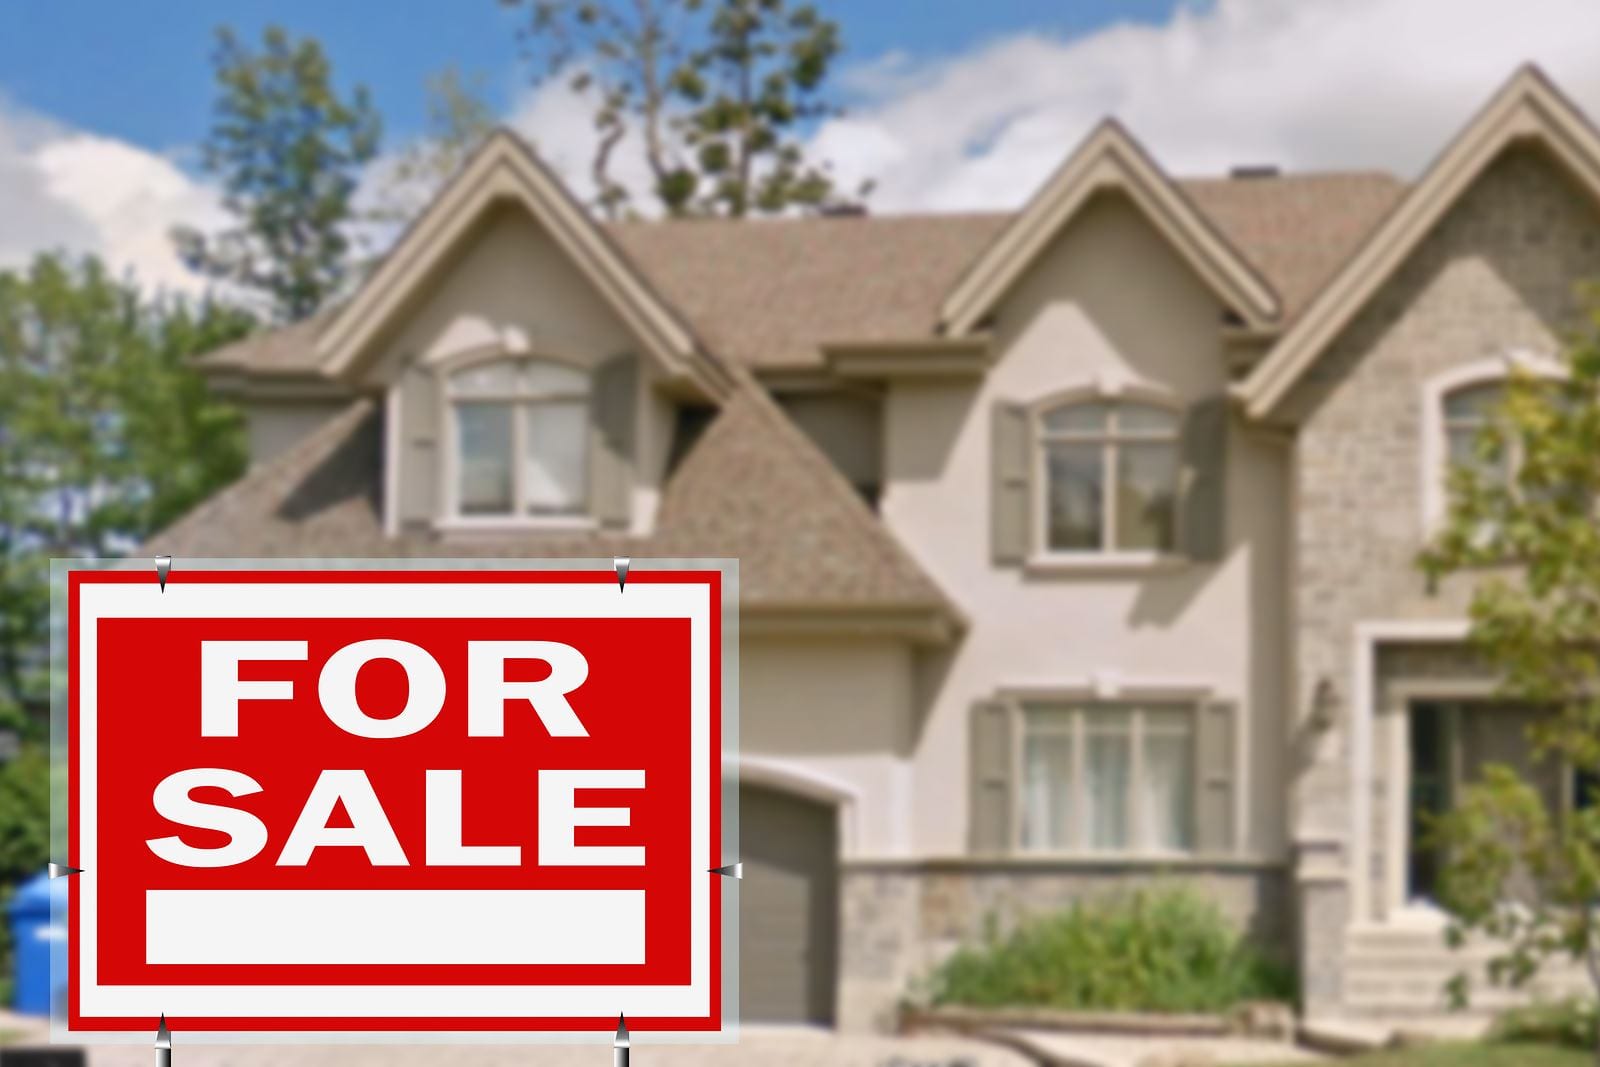 How to Find Investment Property for Sale Near Me | Mashvisor